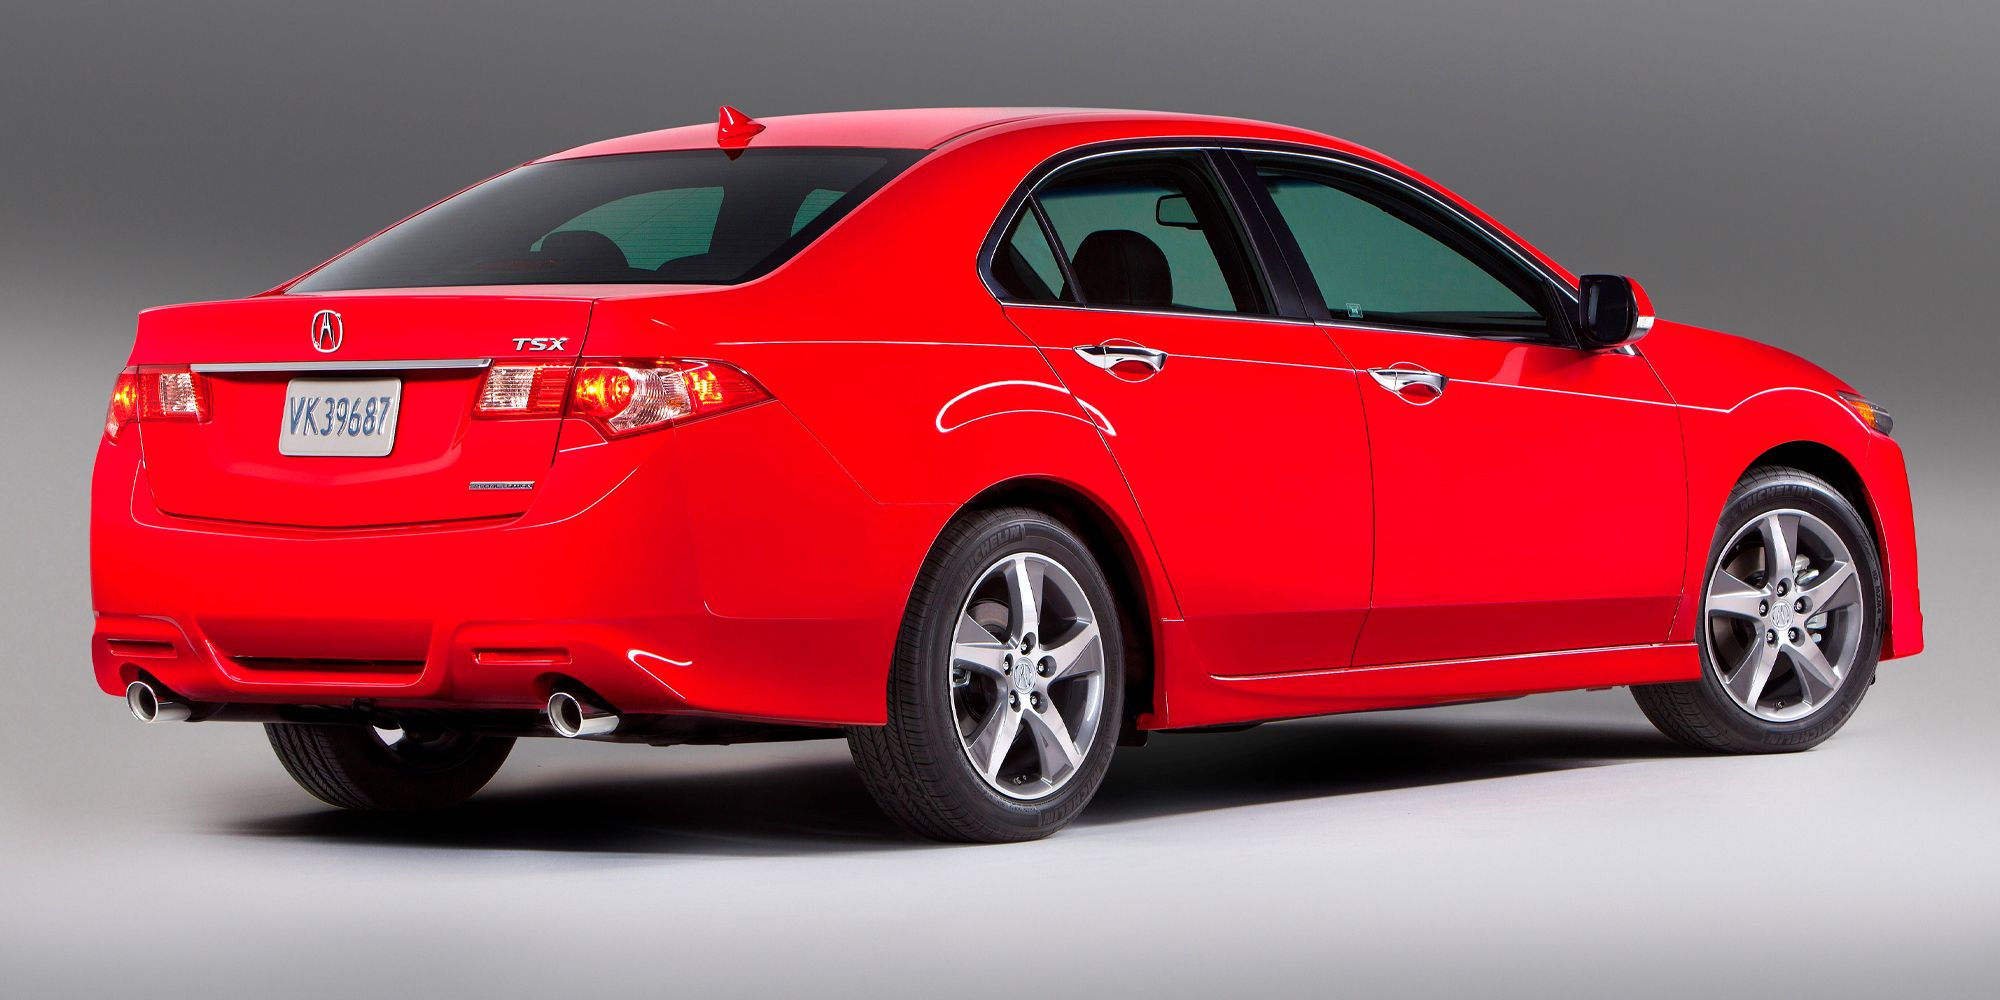 A red Acura TSX